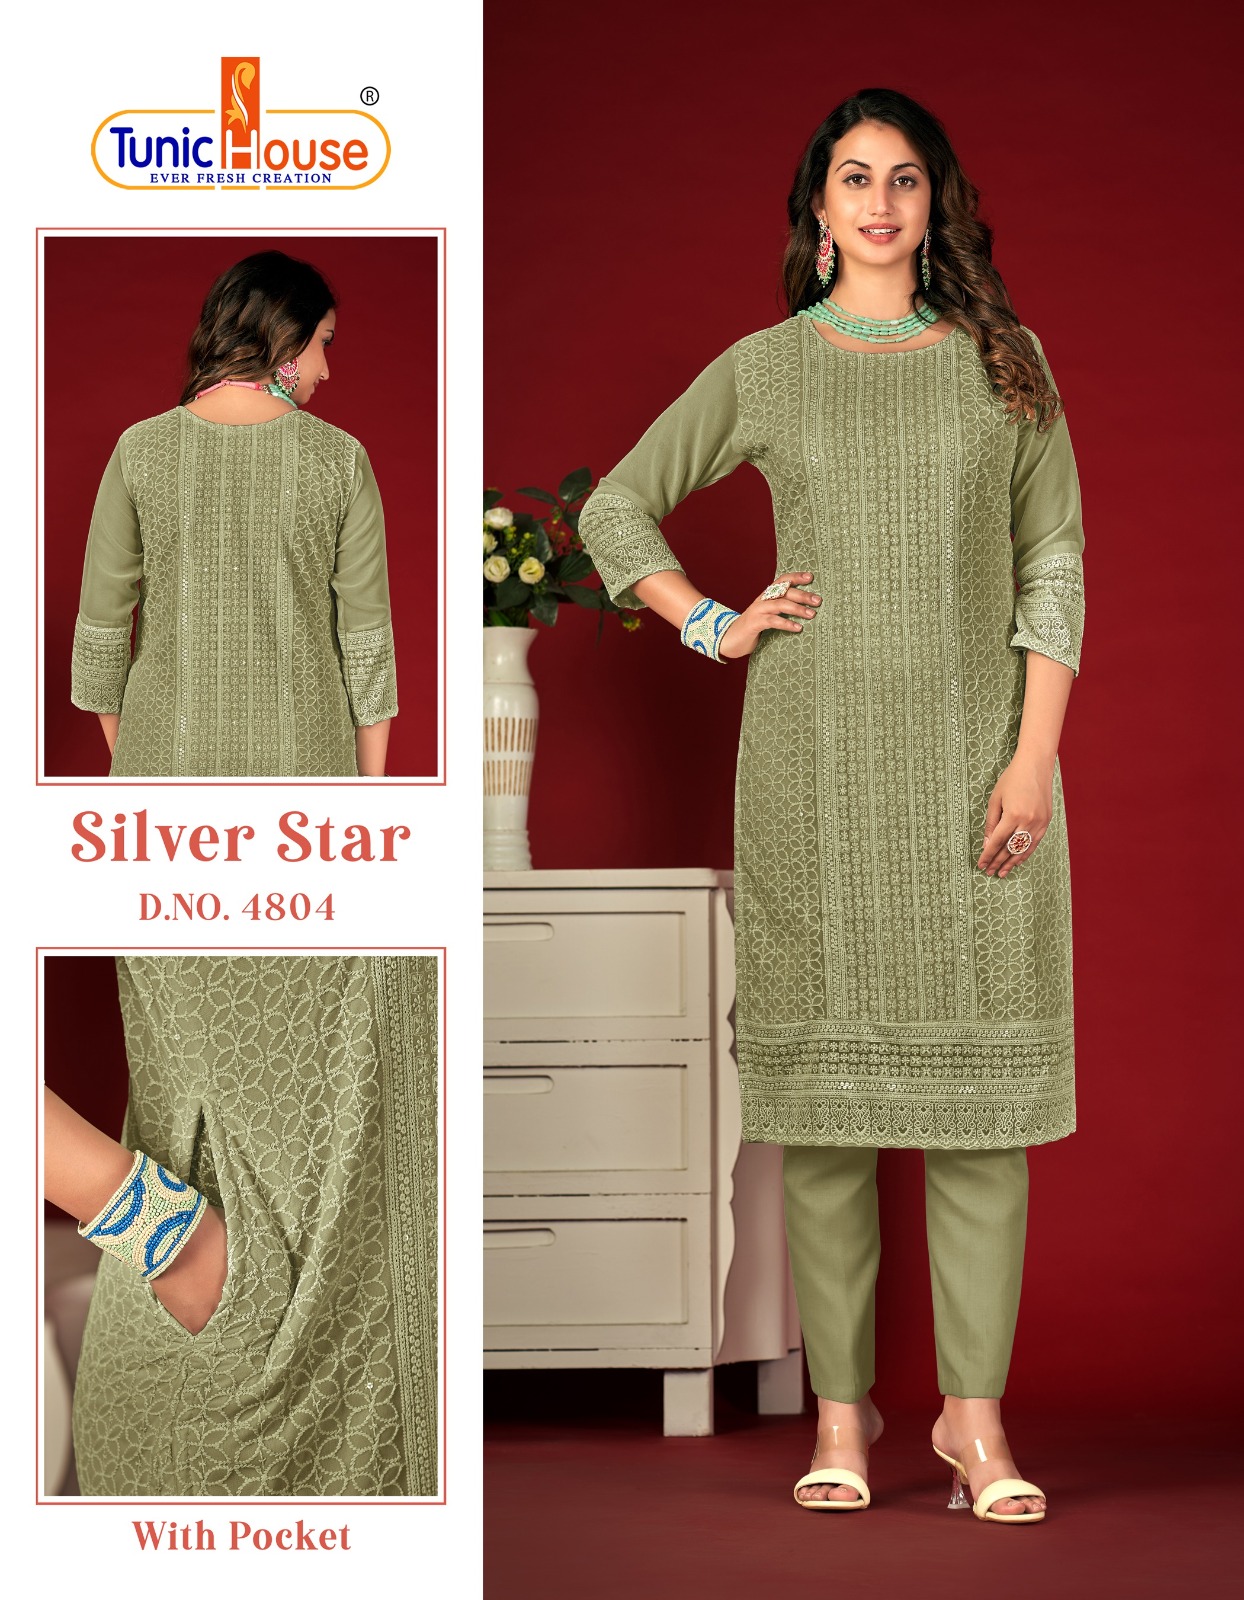 Tunic Houes Silver Star collection 5